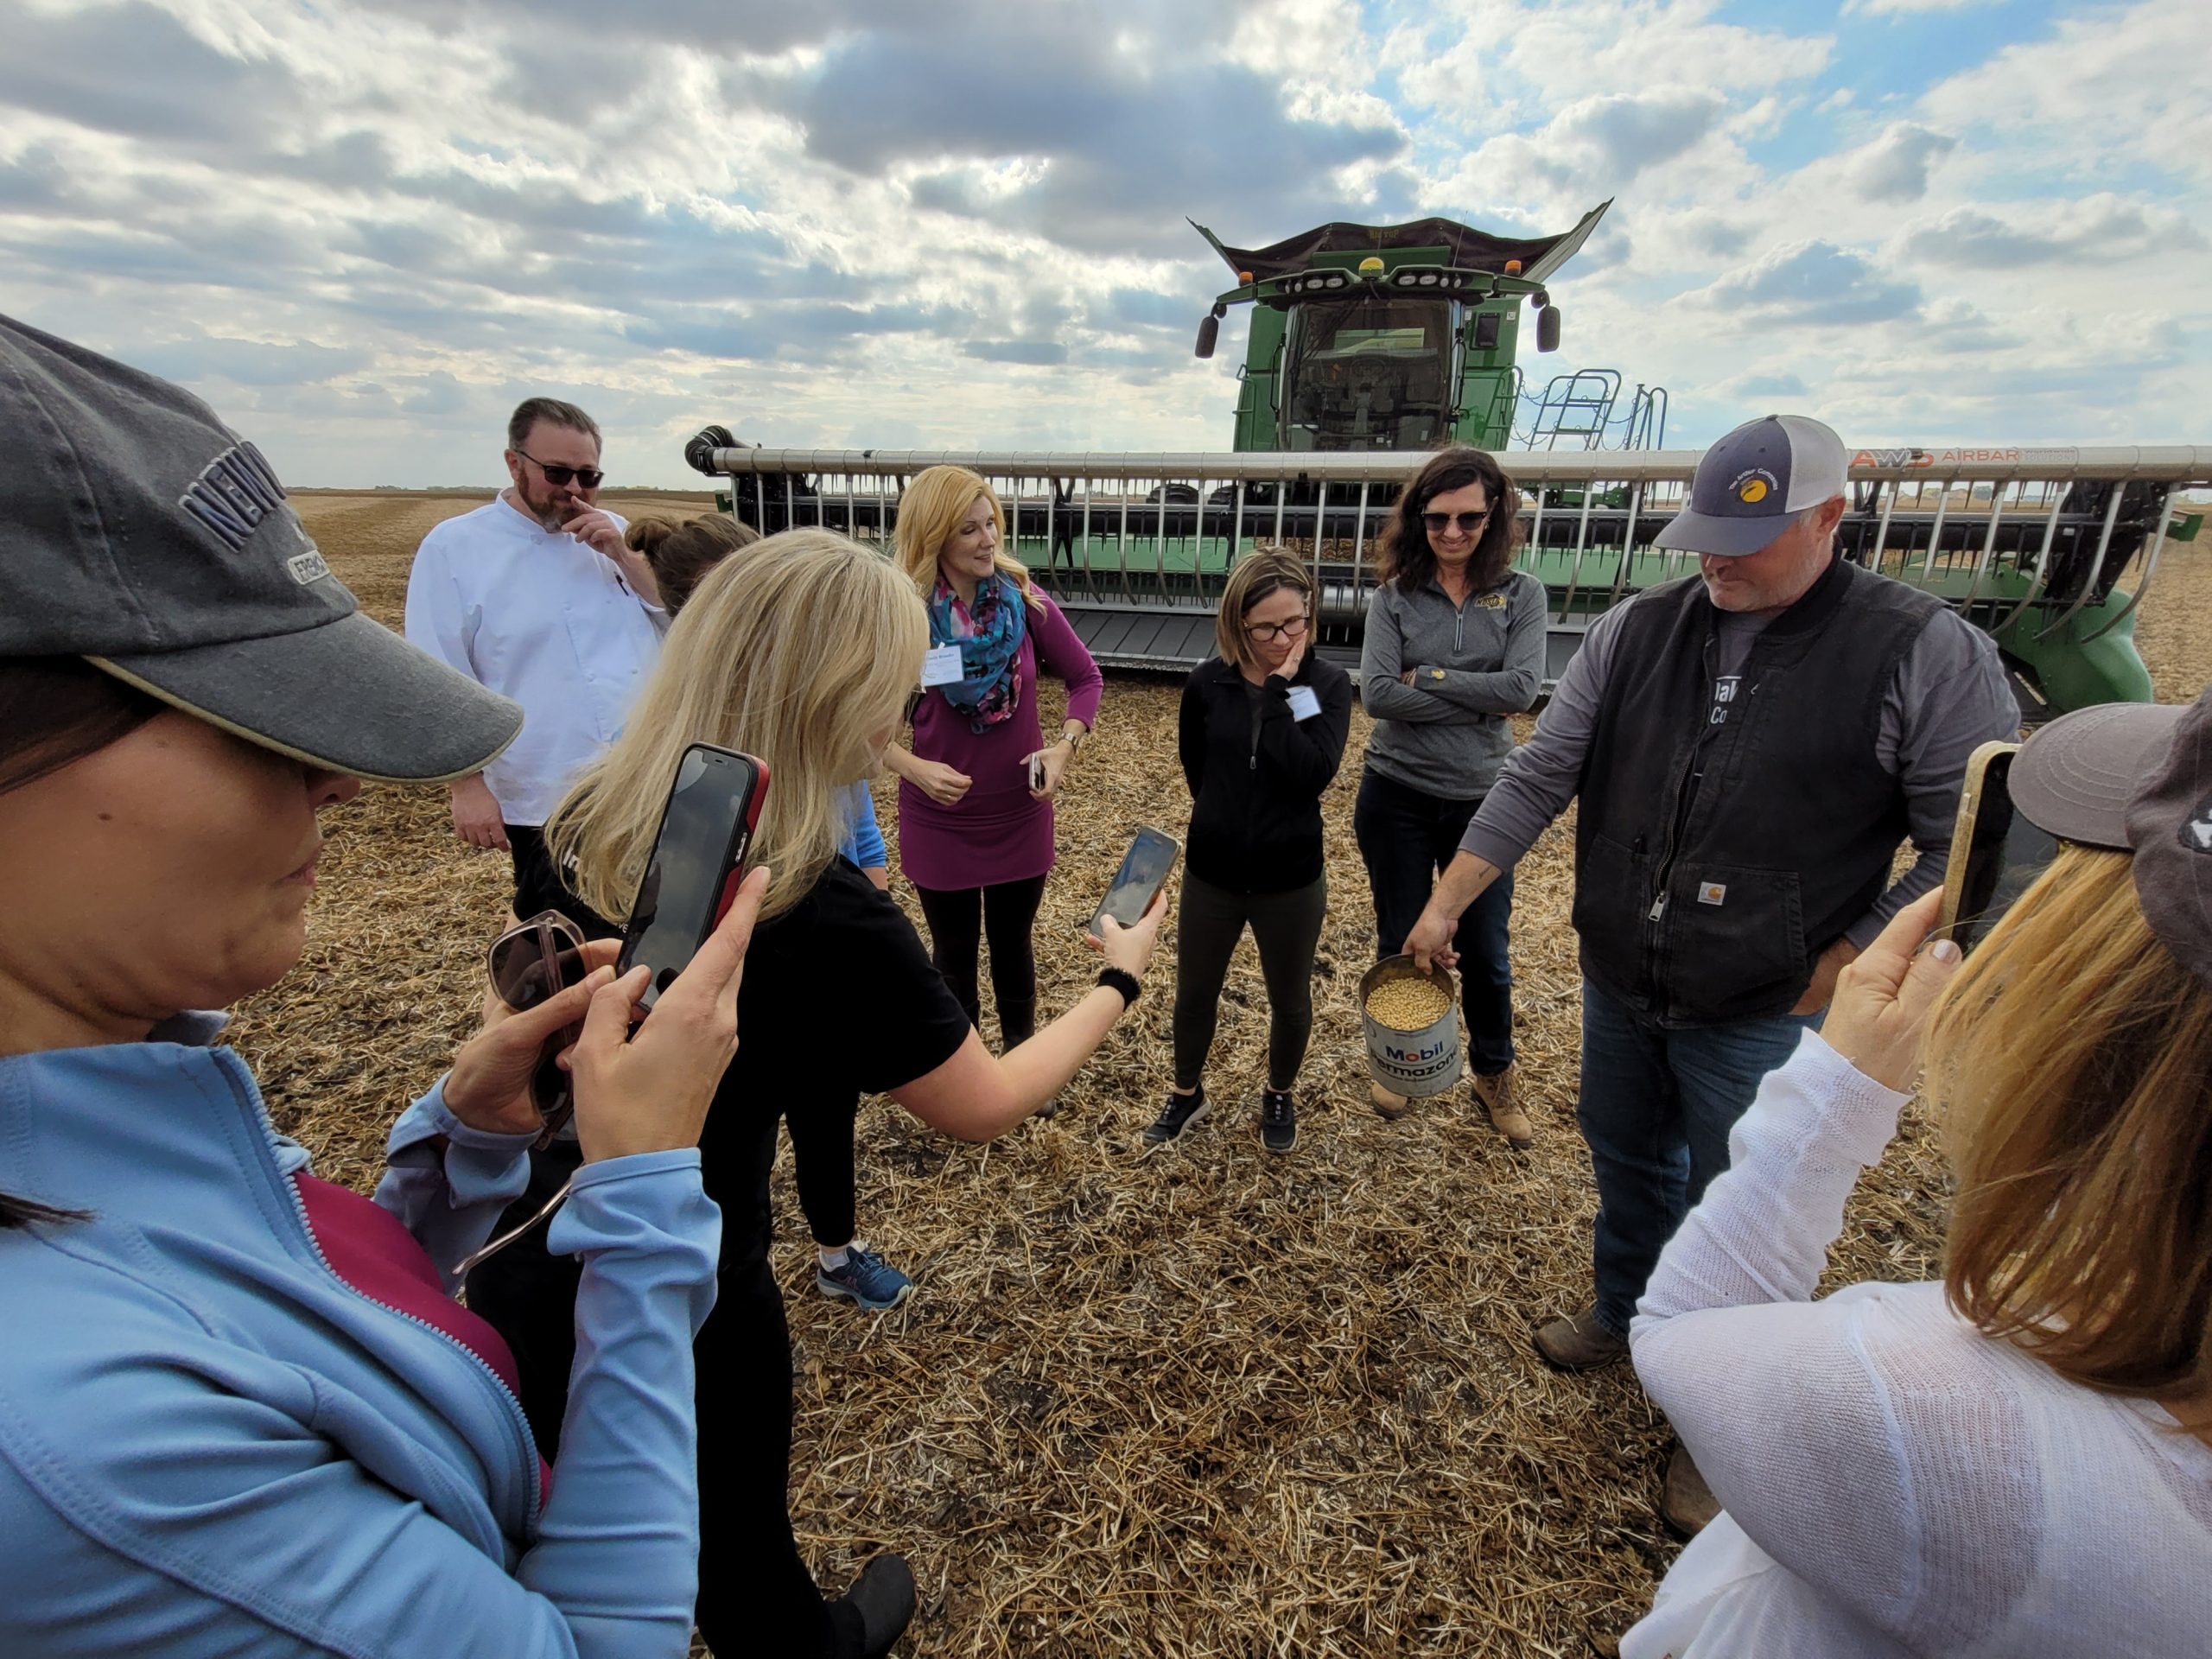 A ground of people with cell phones taking photos of harvested soybeans in a jug